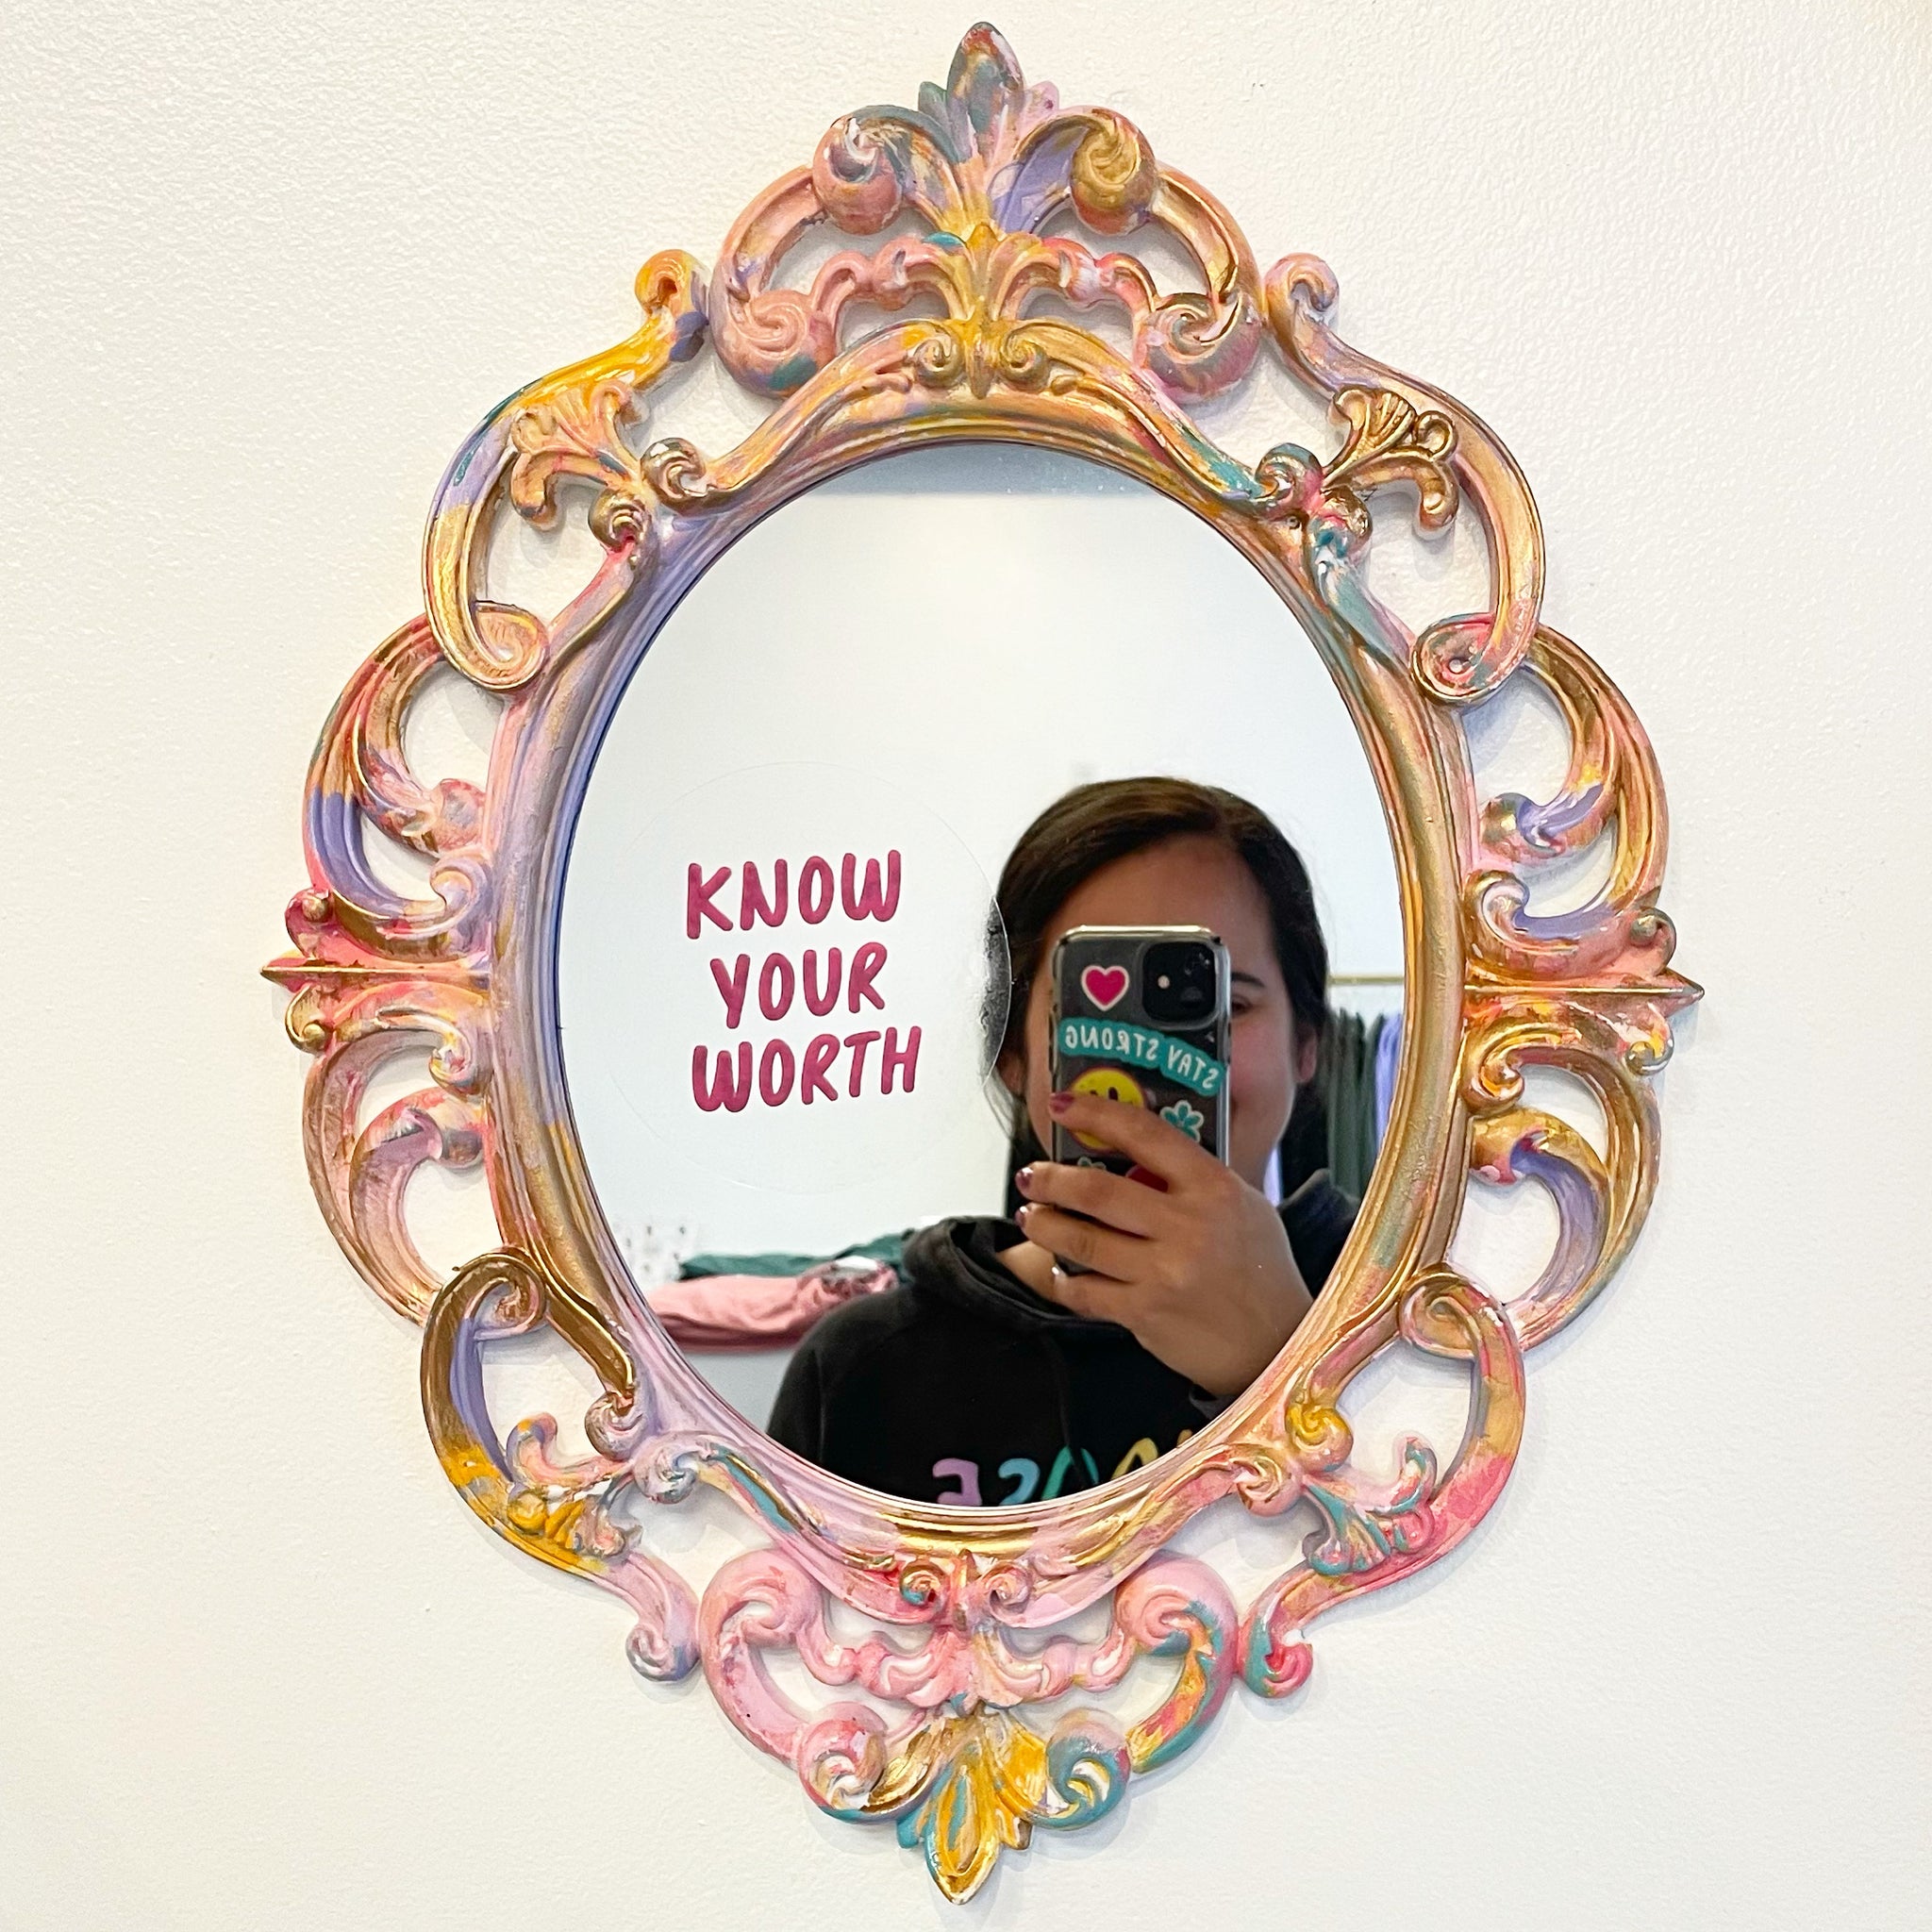 KNOW YOUR WORTH - Mirror Affirmation